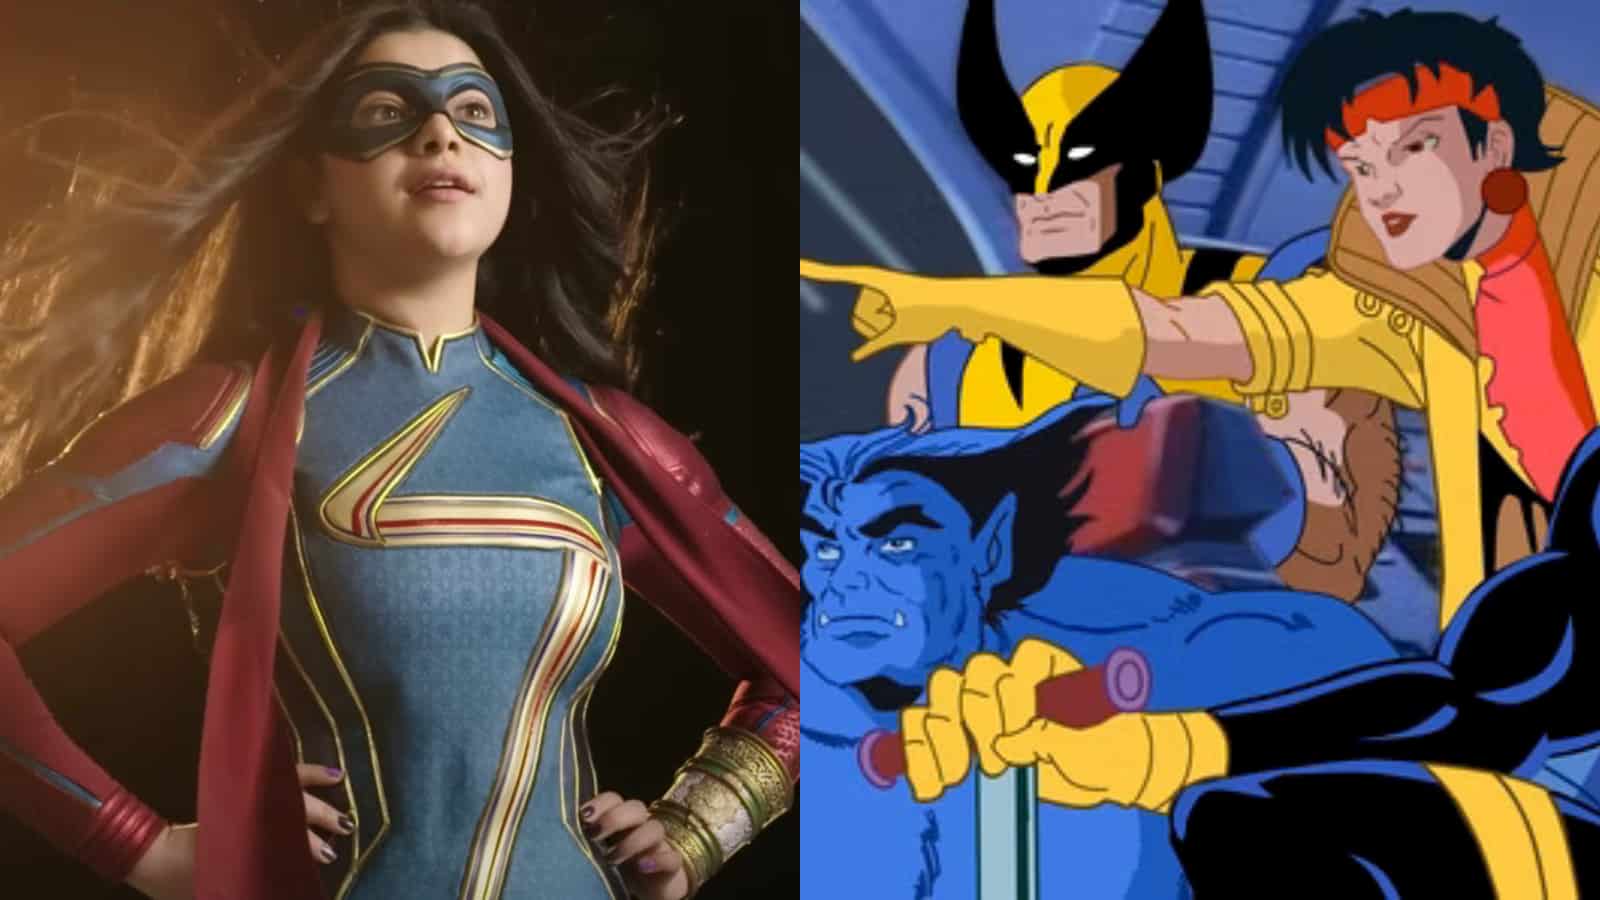 Ms. Marvel and the animated X-Men series.